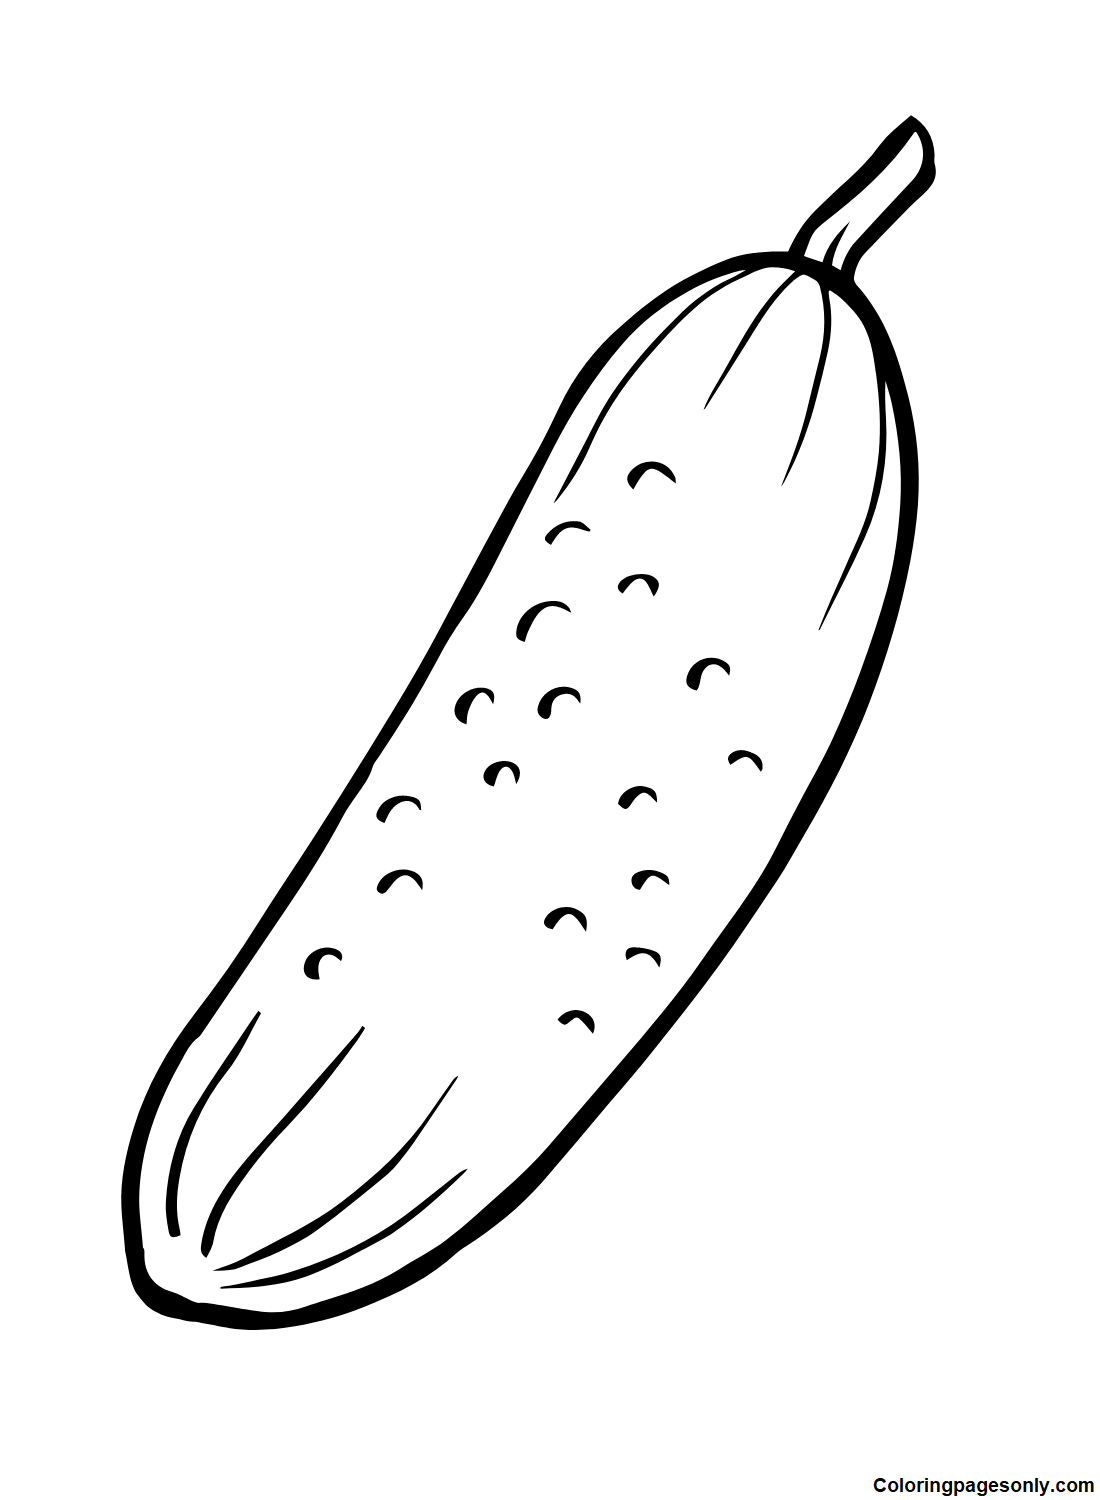 Cucumber to Print Coloring Pages